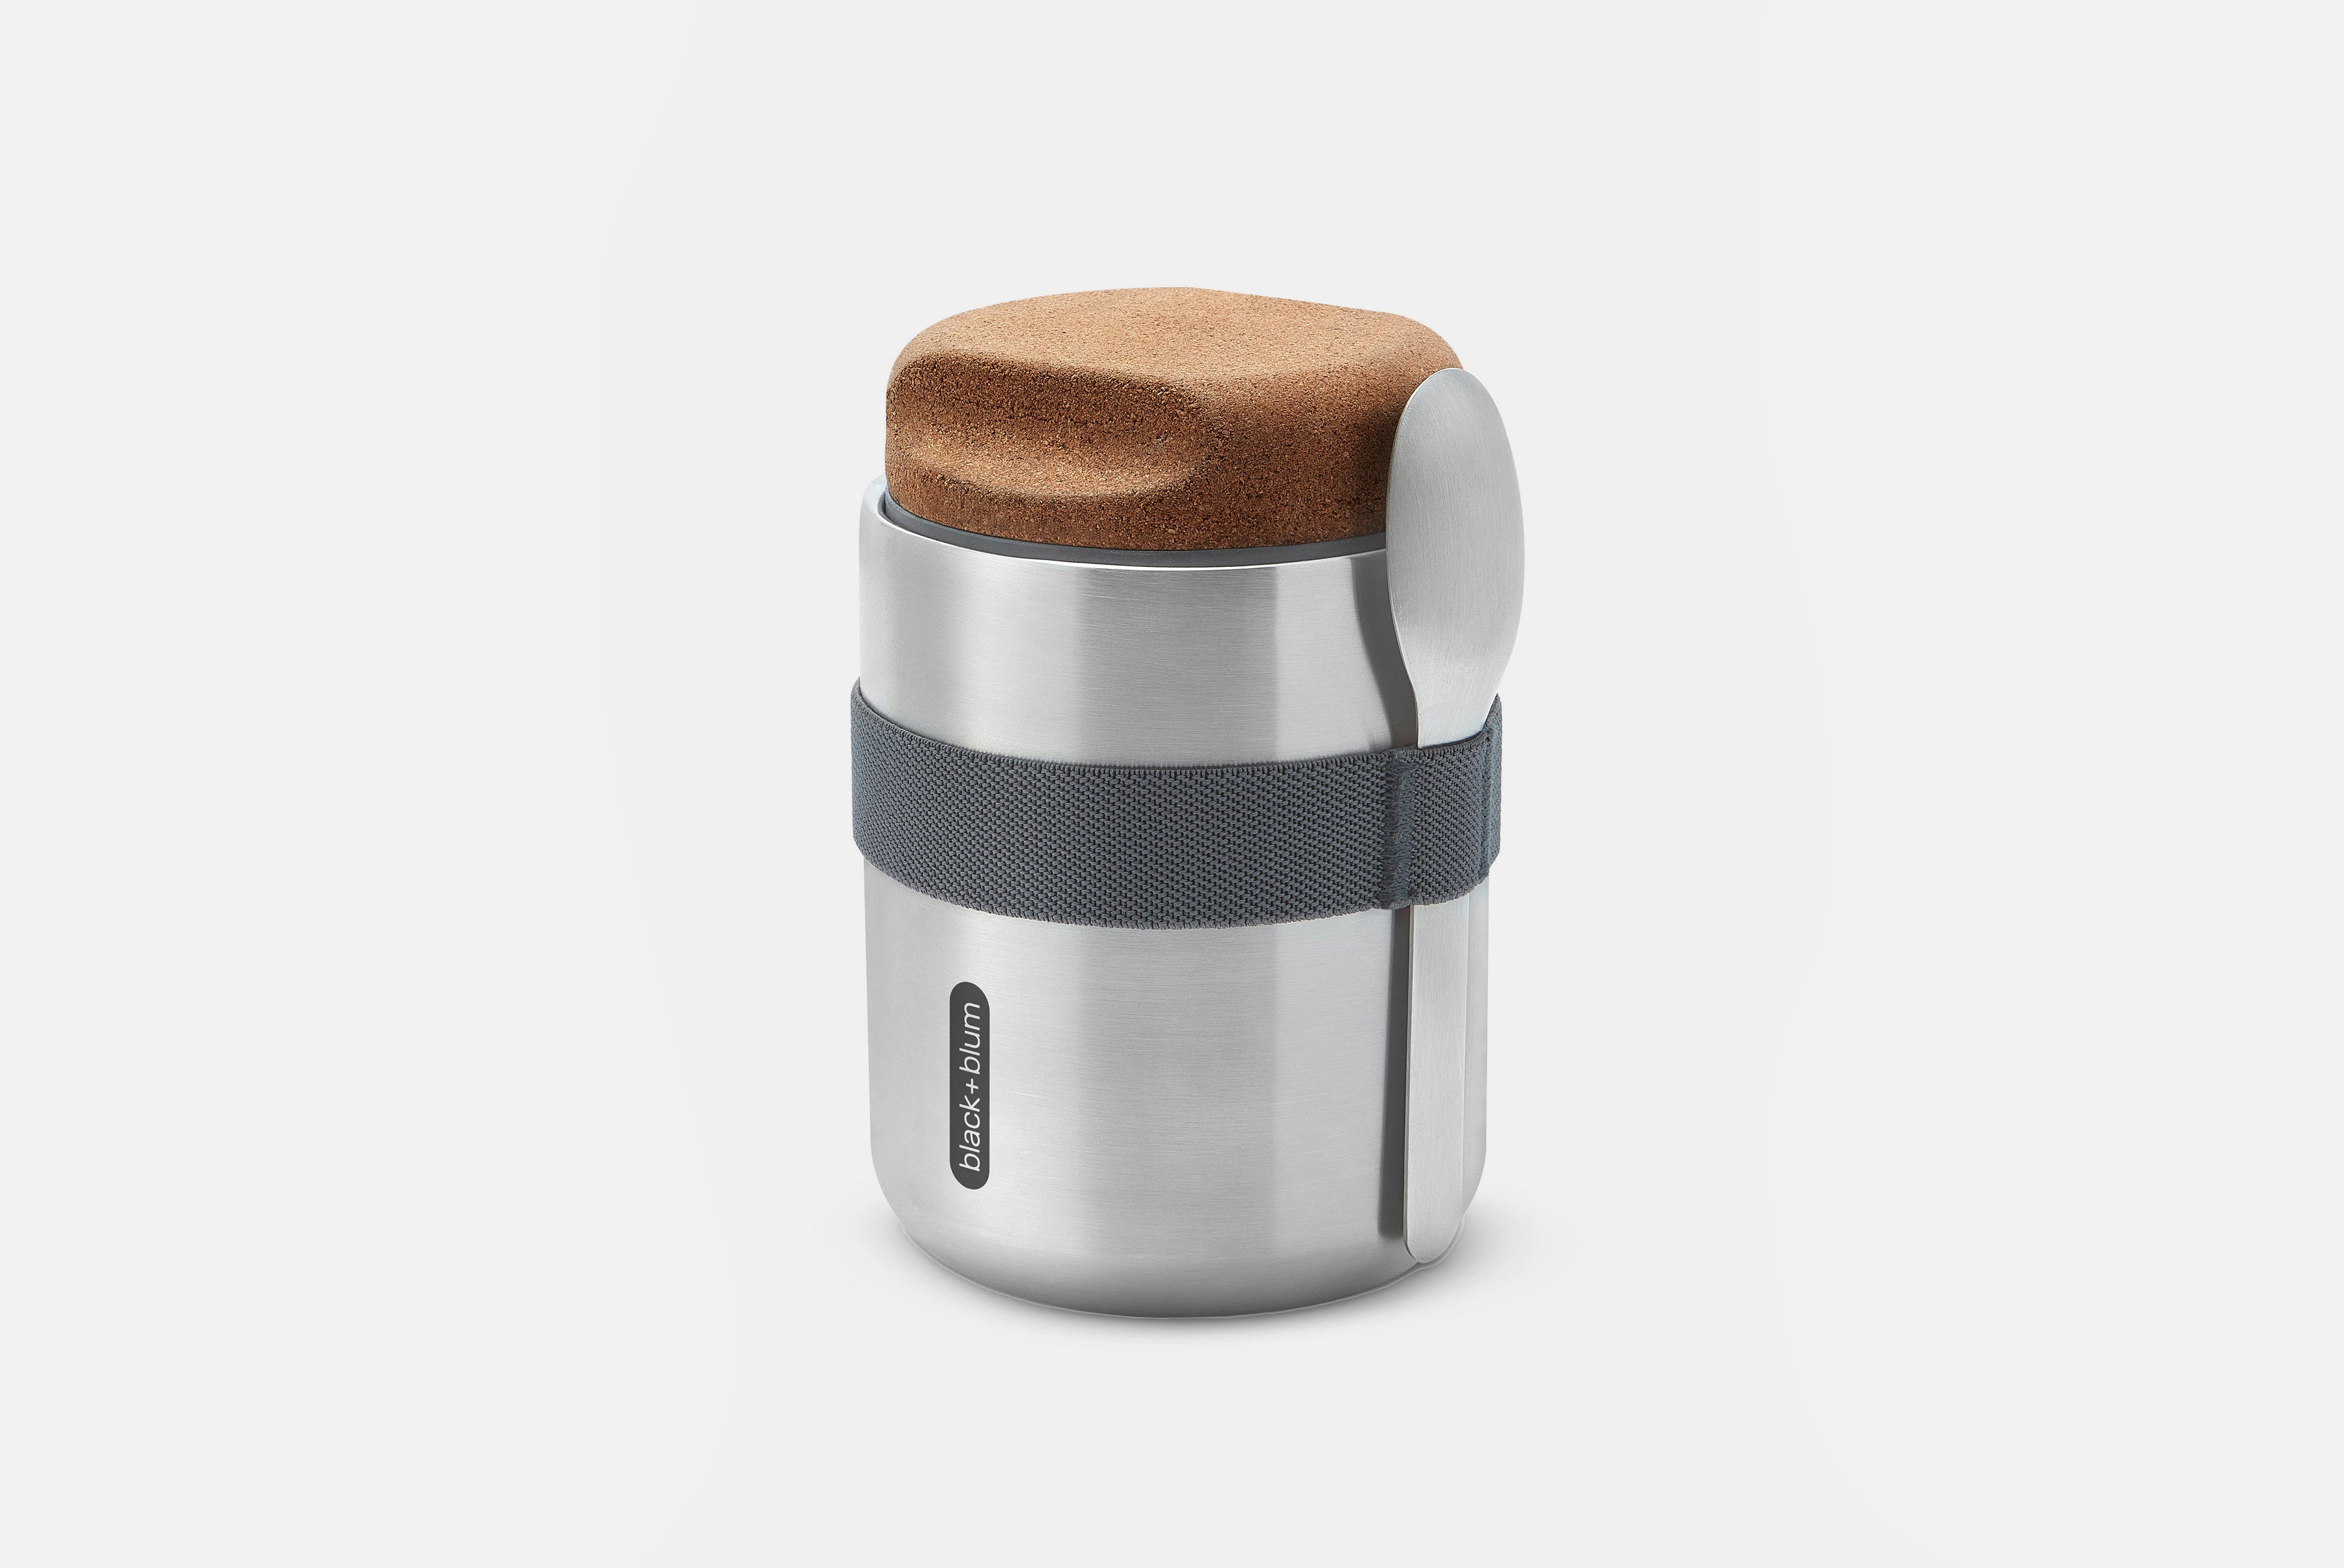 Thermo Pot Lunch Canister with Cork Lid